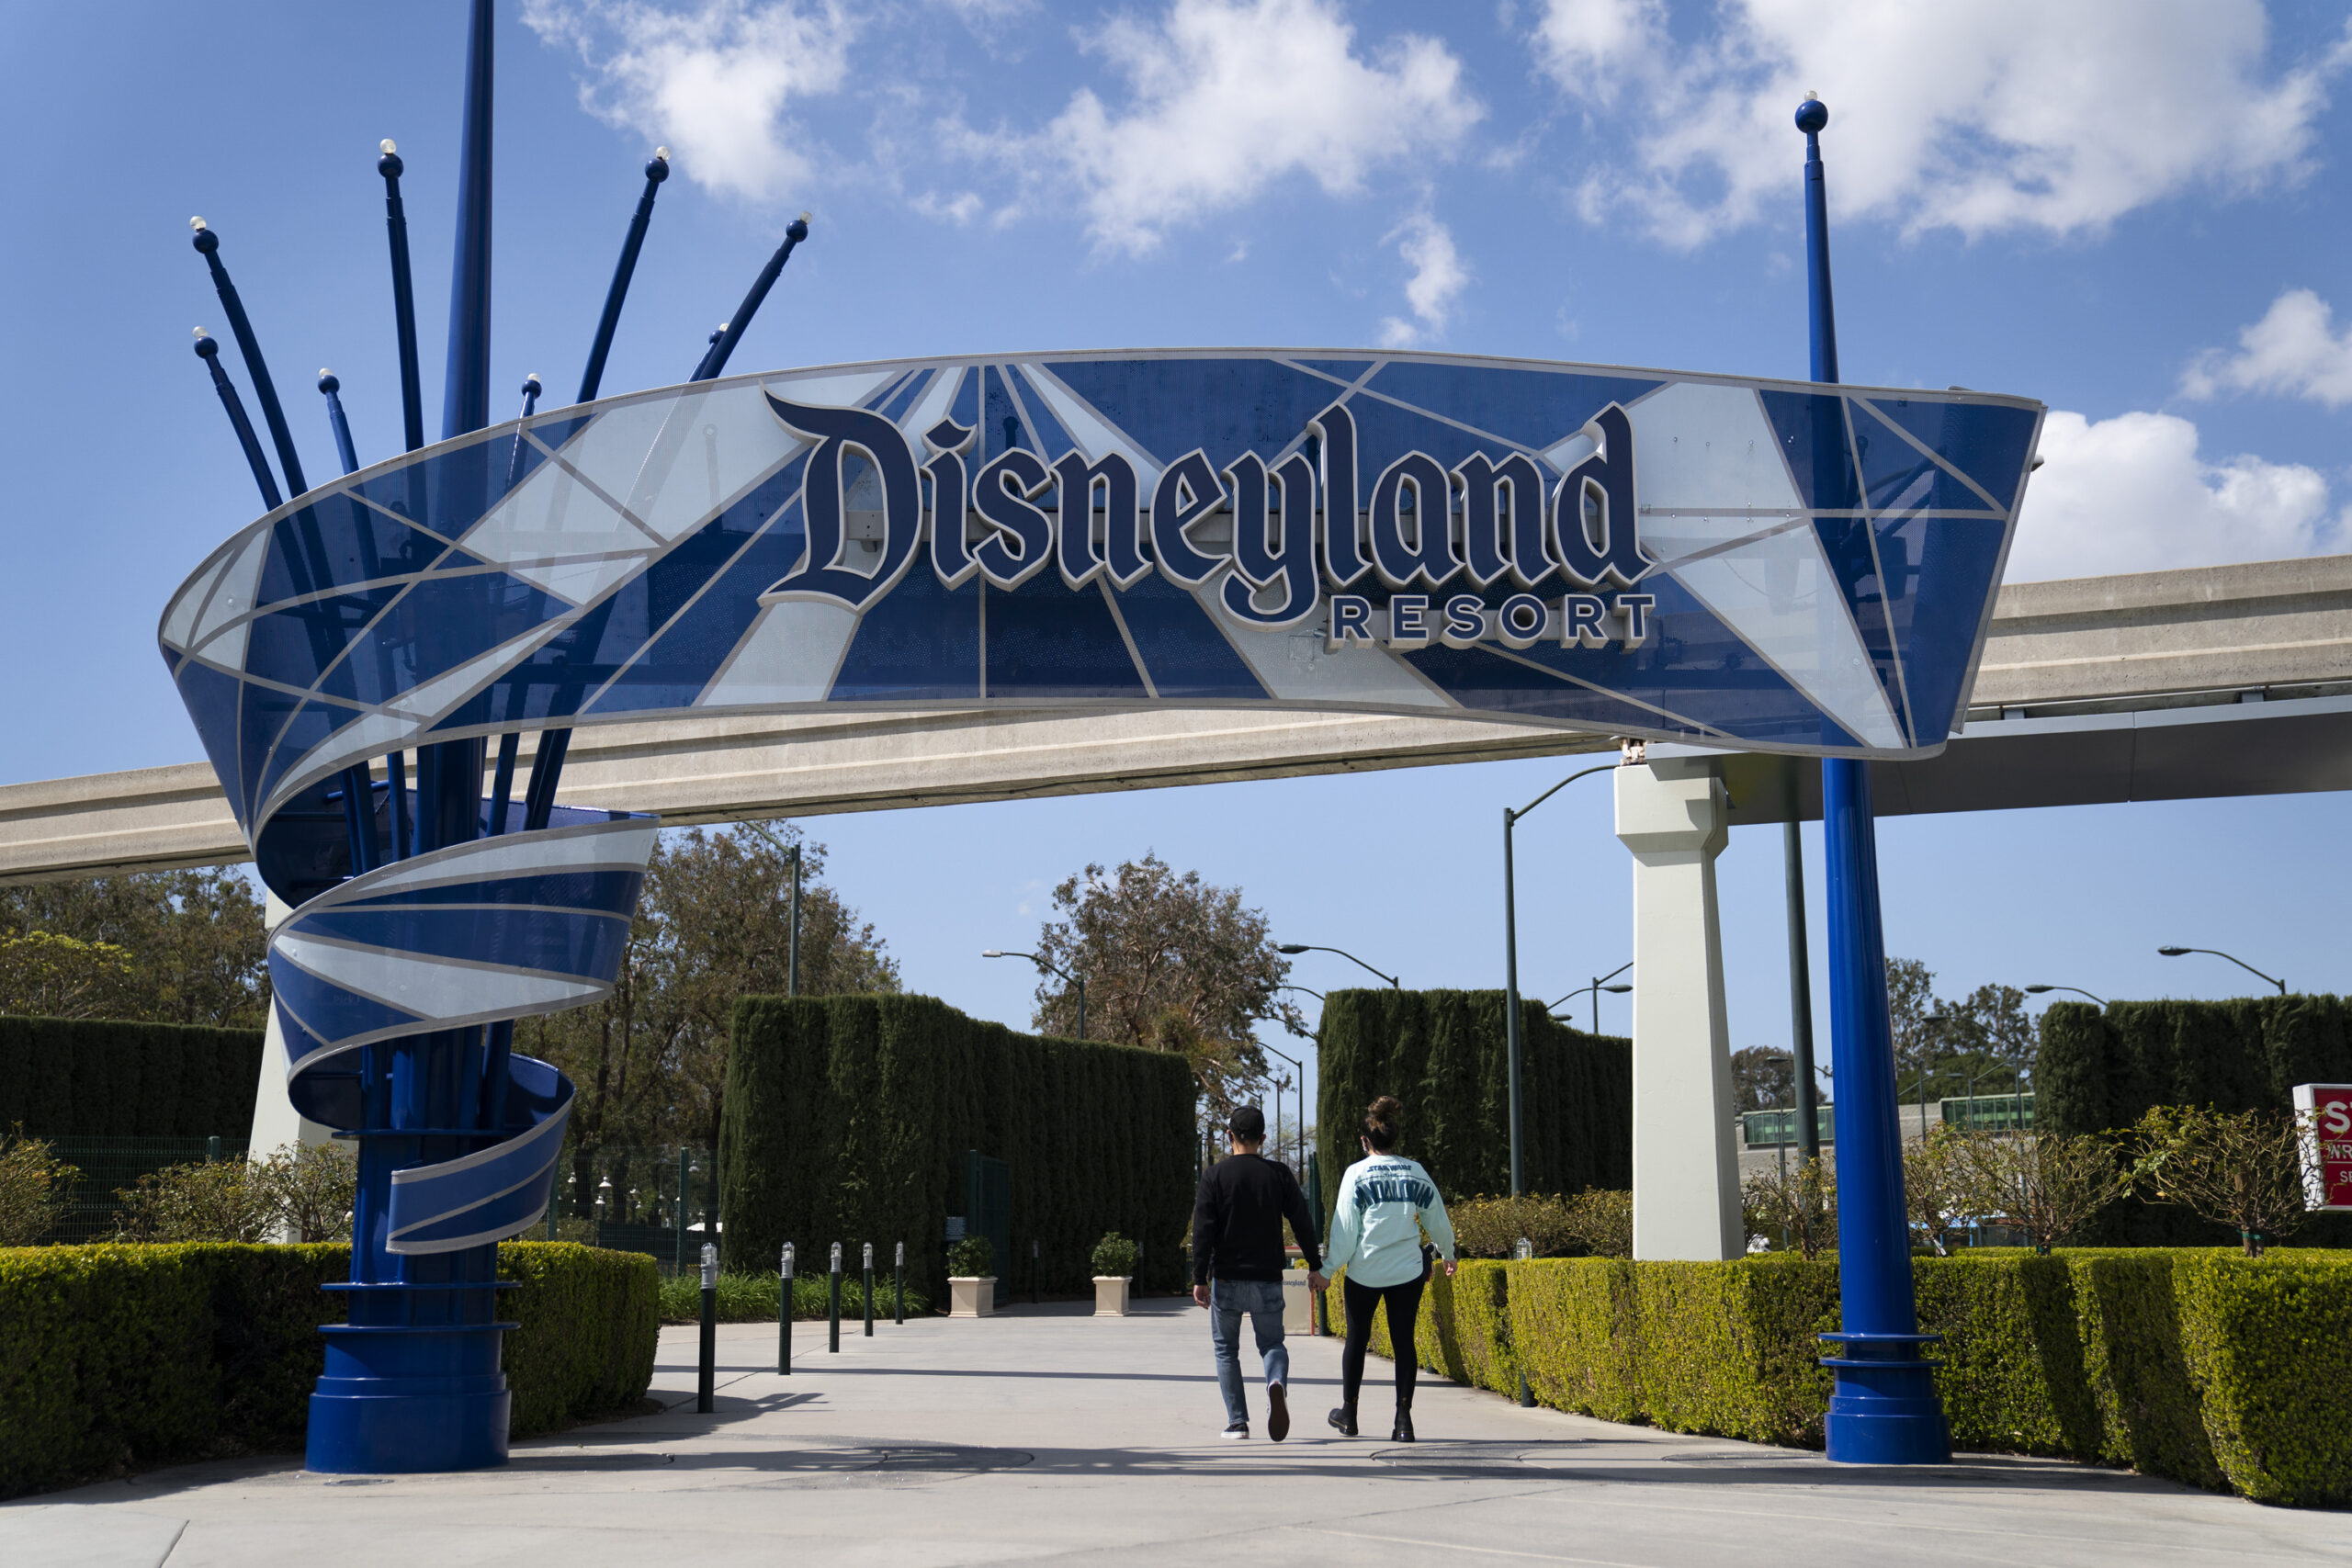 FILE - Two visitors enter Disneyland Resort in Anaheim, Calif., on March 9, 2021. Disneyland said Thursday, April 8, 2021, that its new Avengers Campus will debut on June 4, nearly a year after originally planned. (AP Photo/Jae C. Hong)